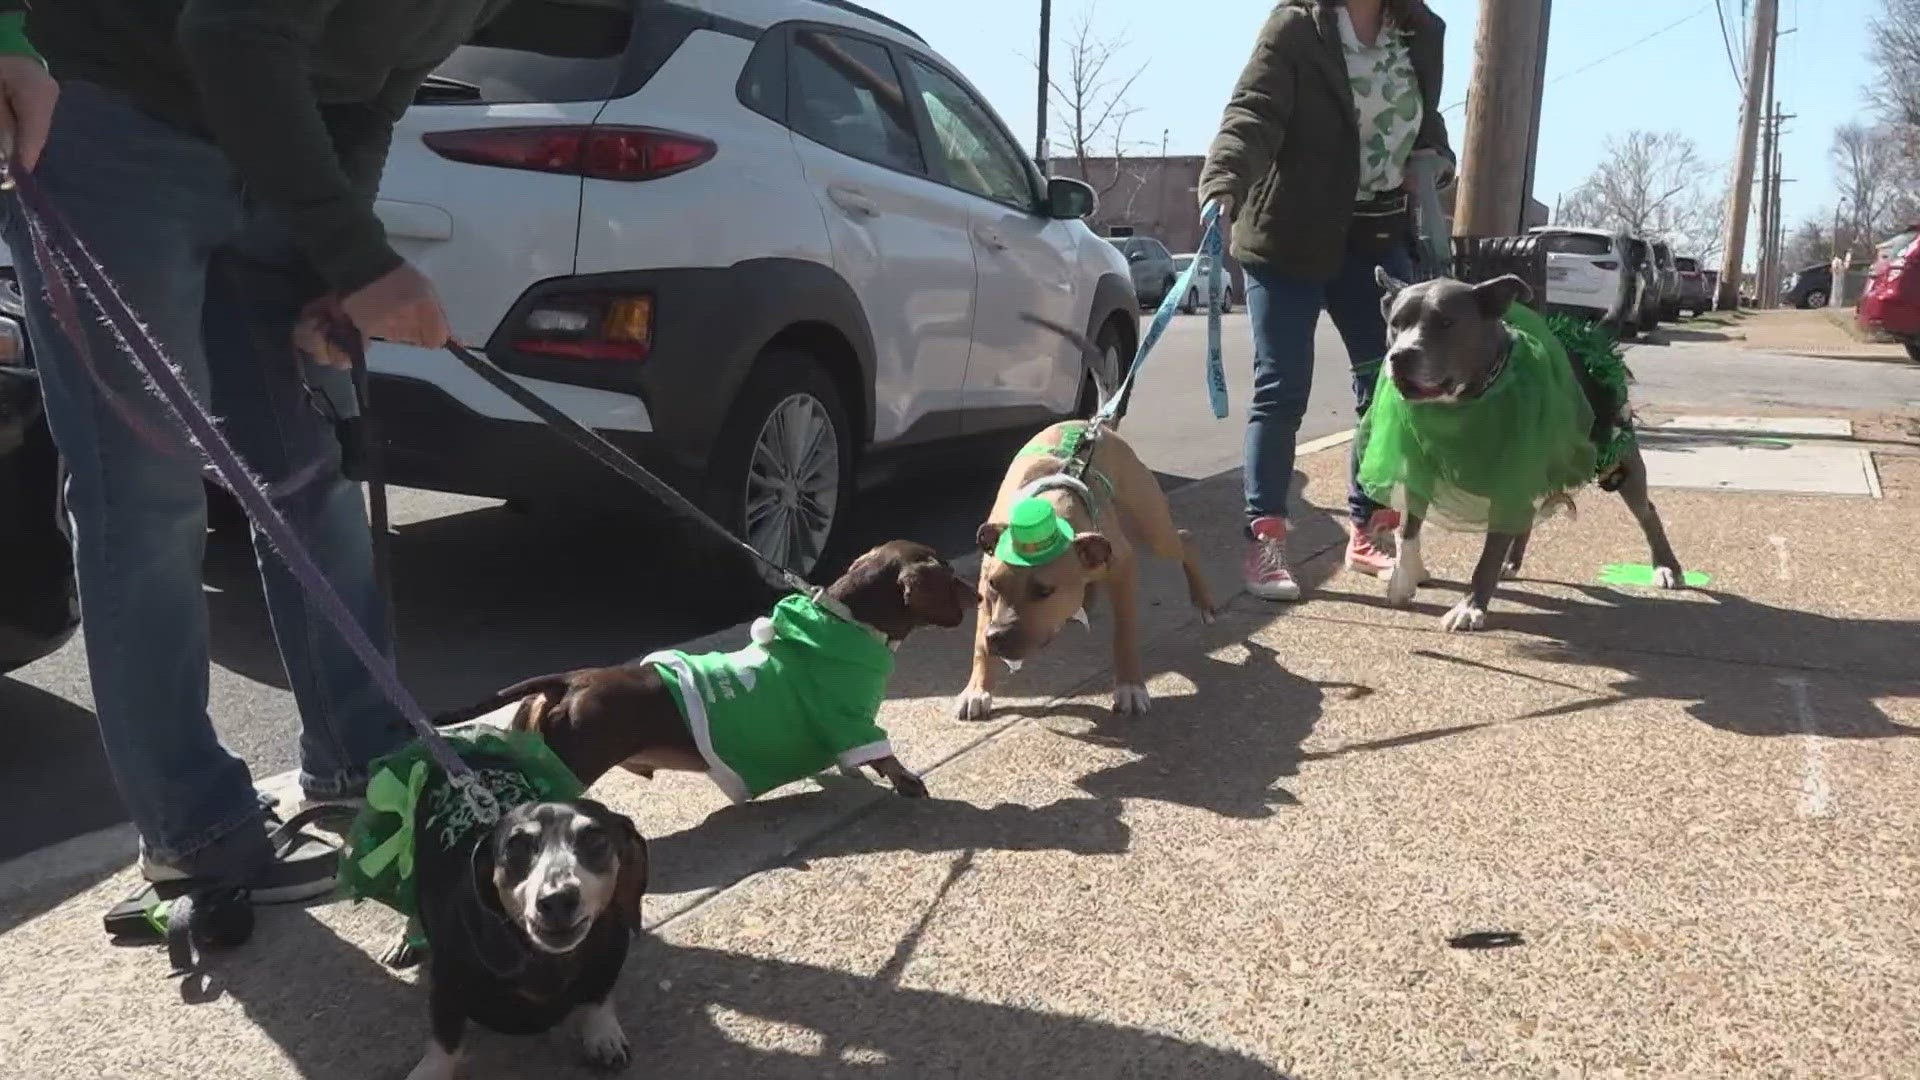 The dogs were the star of the show for celebrations in Dogtown. The "Luck of the Paws" costume contest was just a warm-up for the big parade on March 17.